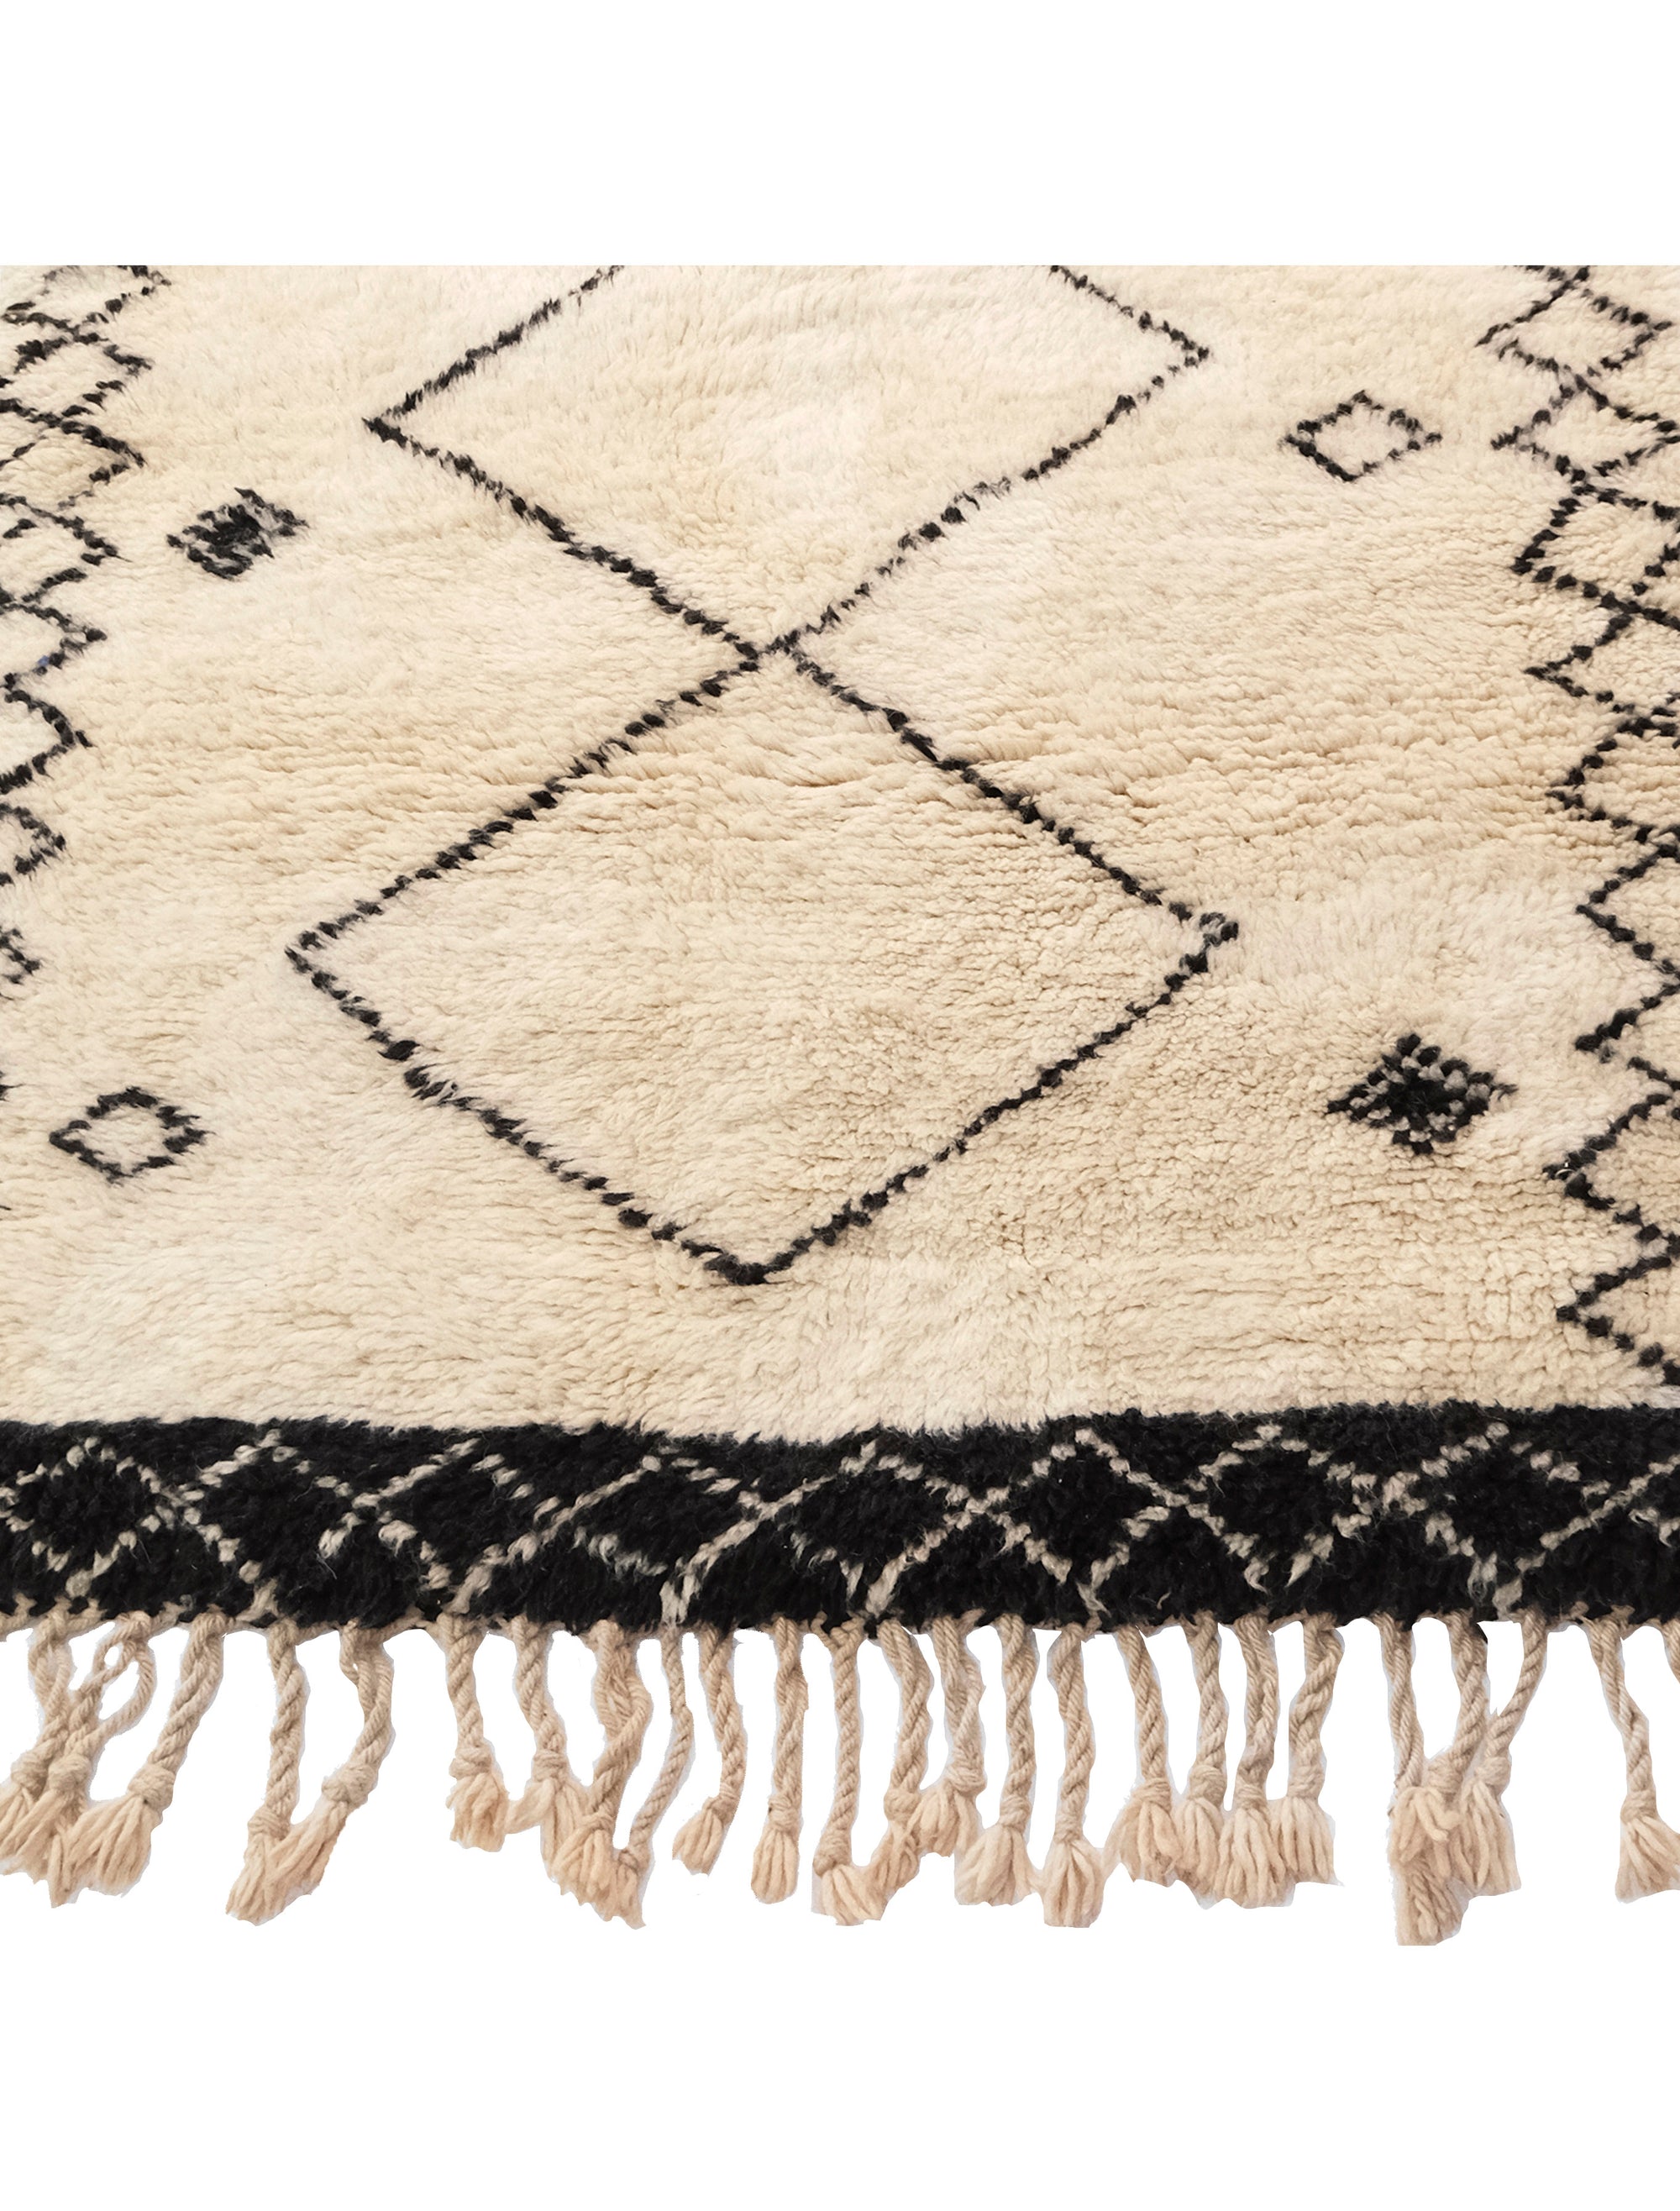 Discover elegance with our "Monochrome Diamond Ensemble" Beni Ourain Rug. Its ivory base features three prominent diamond shapes in a delicate black outline at the center, complemented by two rows of smaller diamonds on each side. Meticulously crafted, this rug effortlessly blends tradition and modern design, making it a versatile and captivating addition to any space.